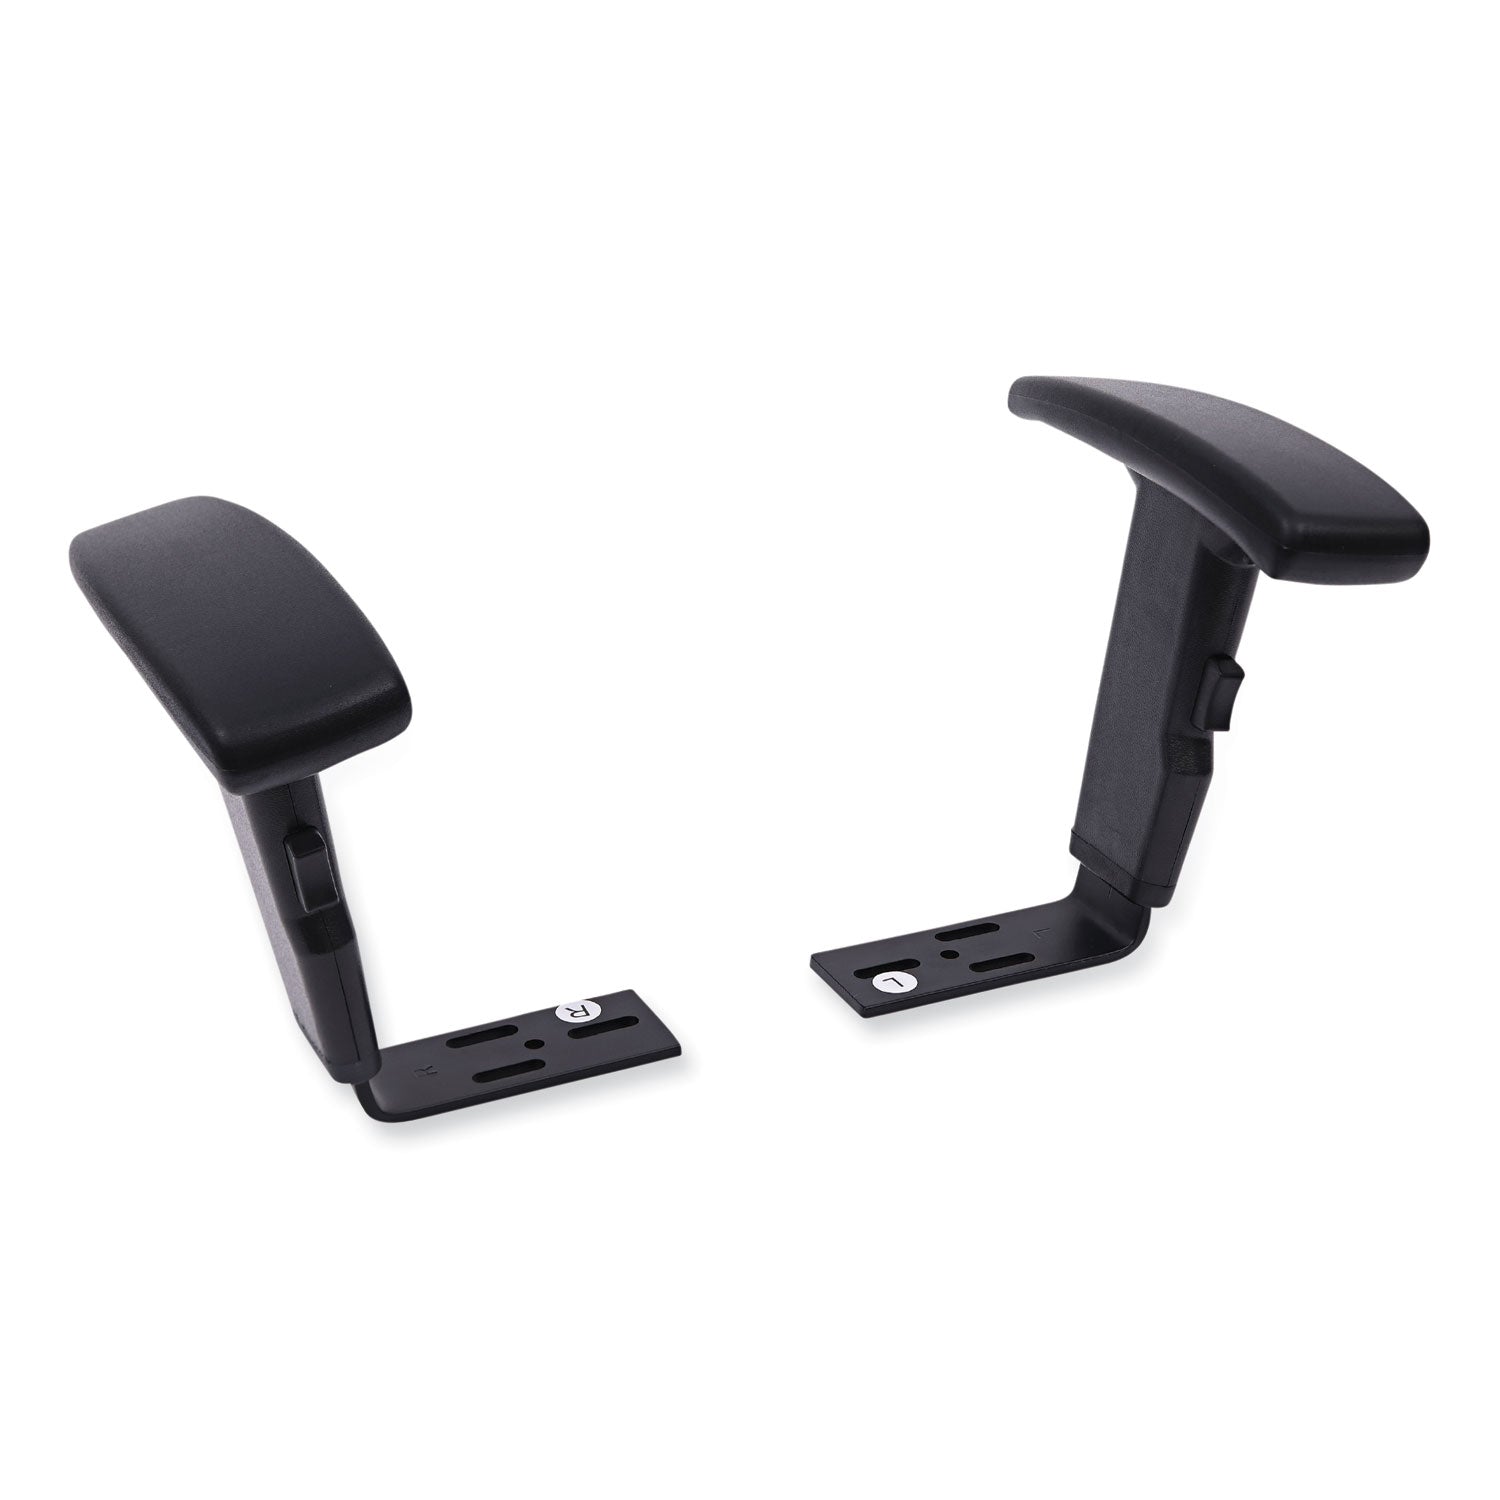 Optional Height-Adjustable T-Arms for Alera Essentia and Interval Series Chairs, Black, 2/Set - 